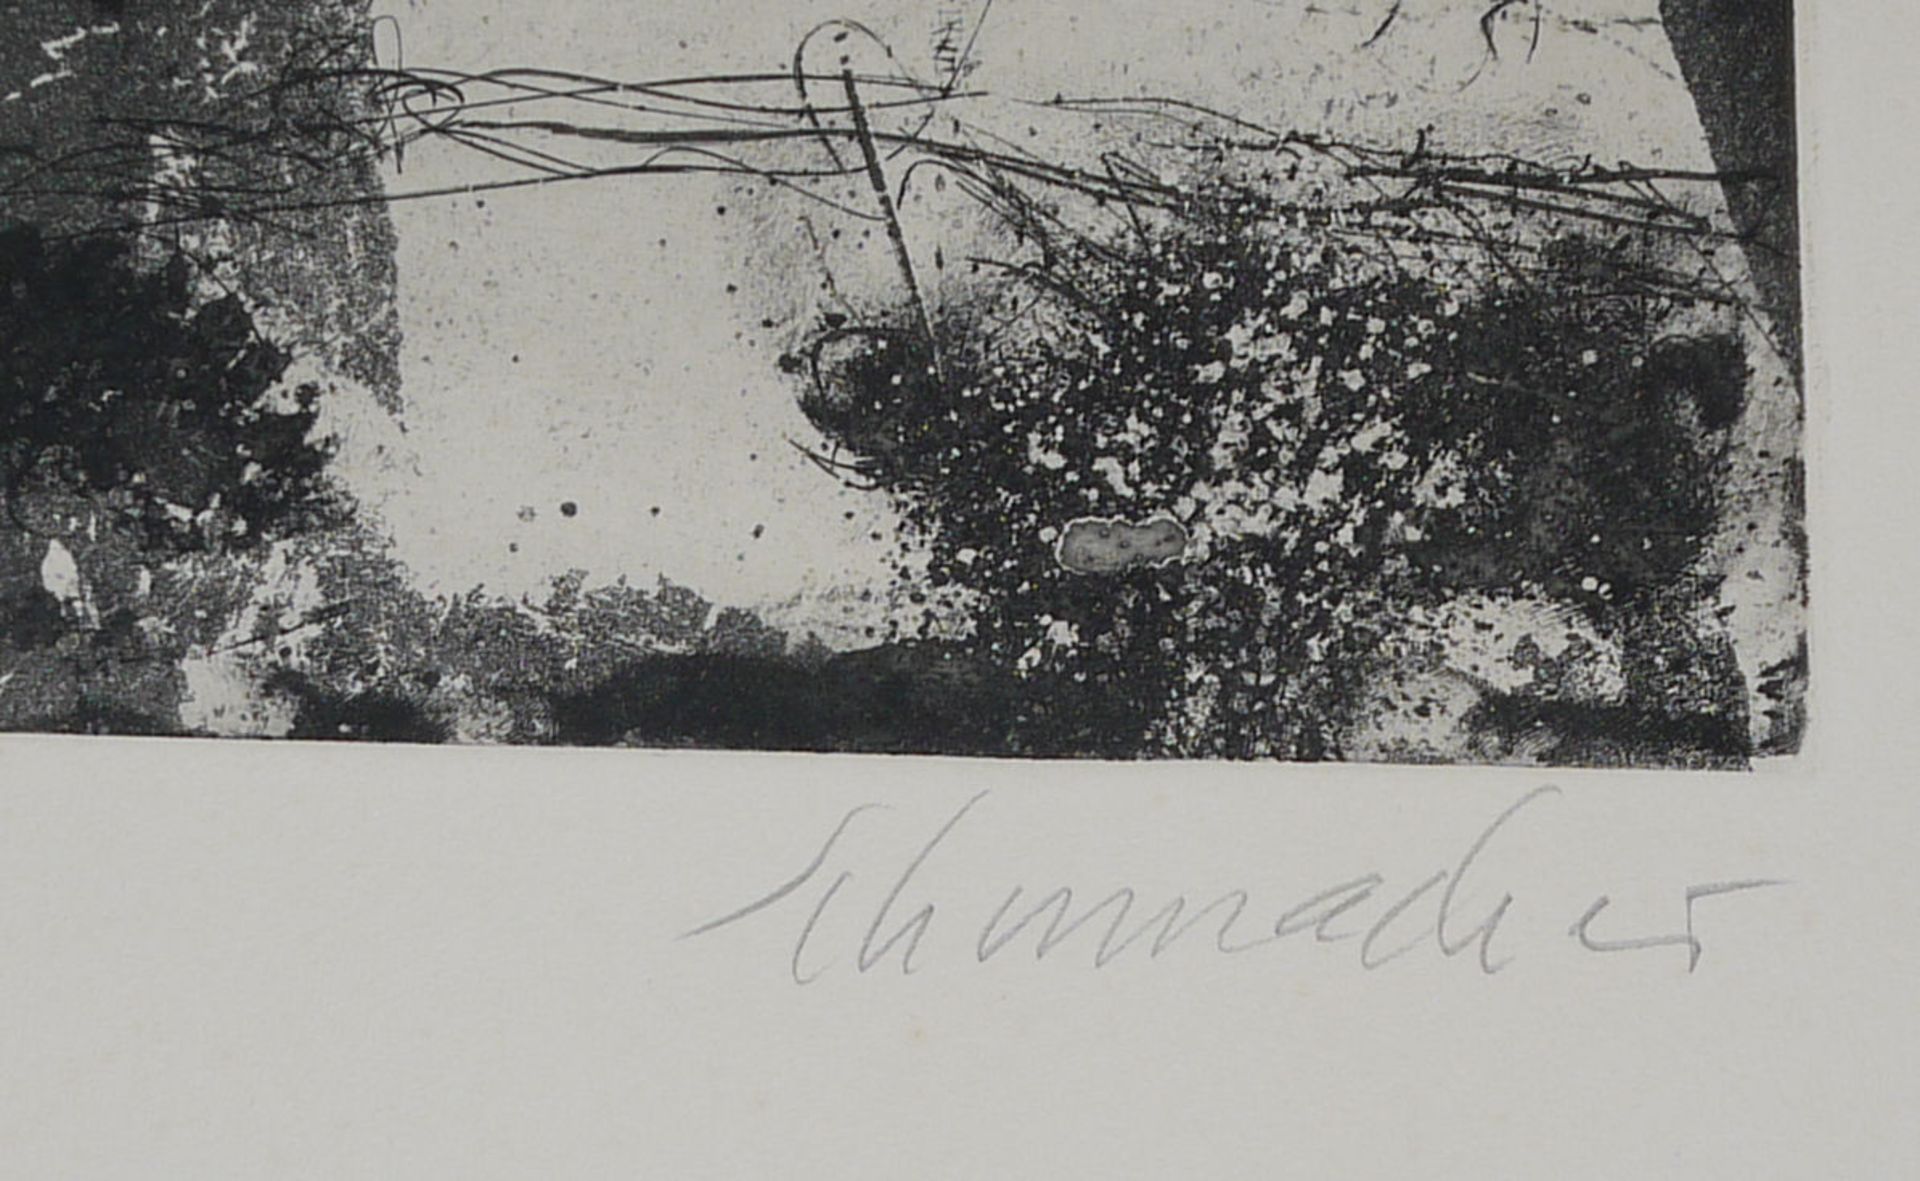 Emil Schumacher, "20. X. 61", signed aquatint etching from 1961  - Image 2 of 2